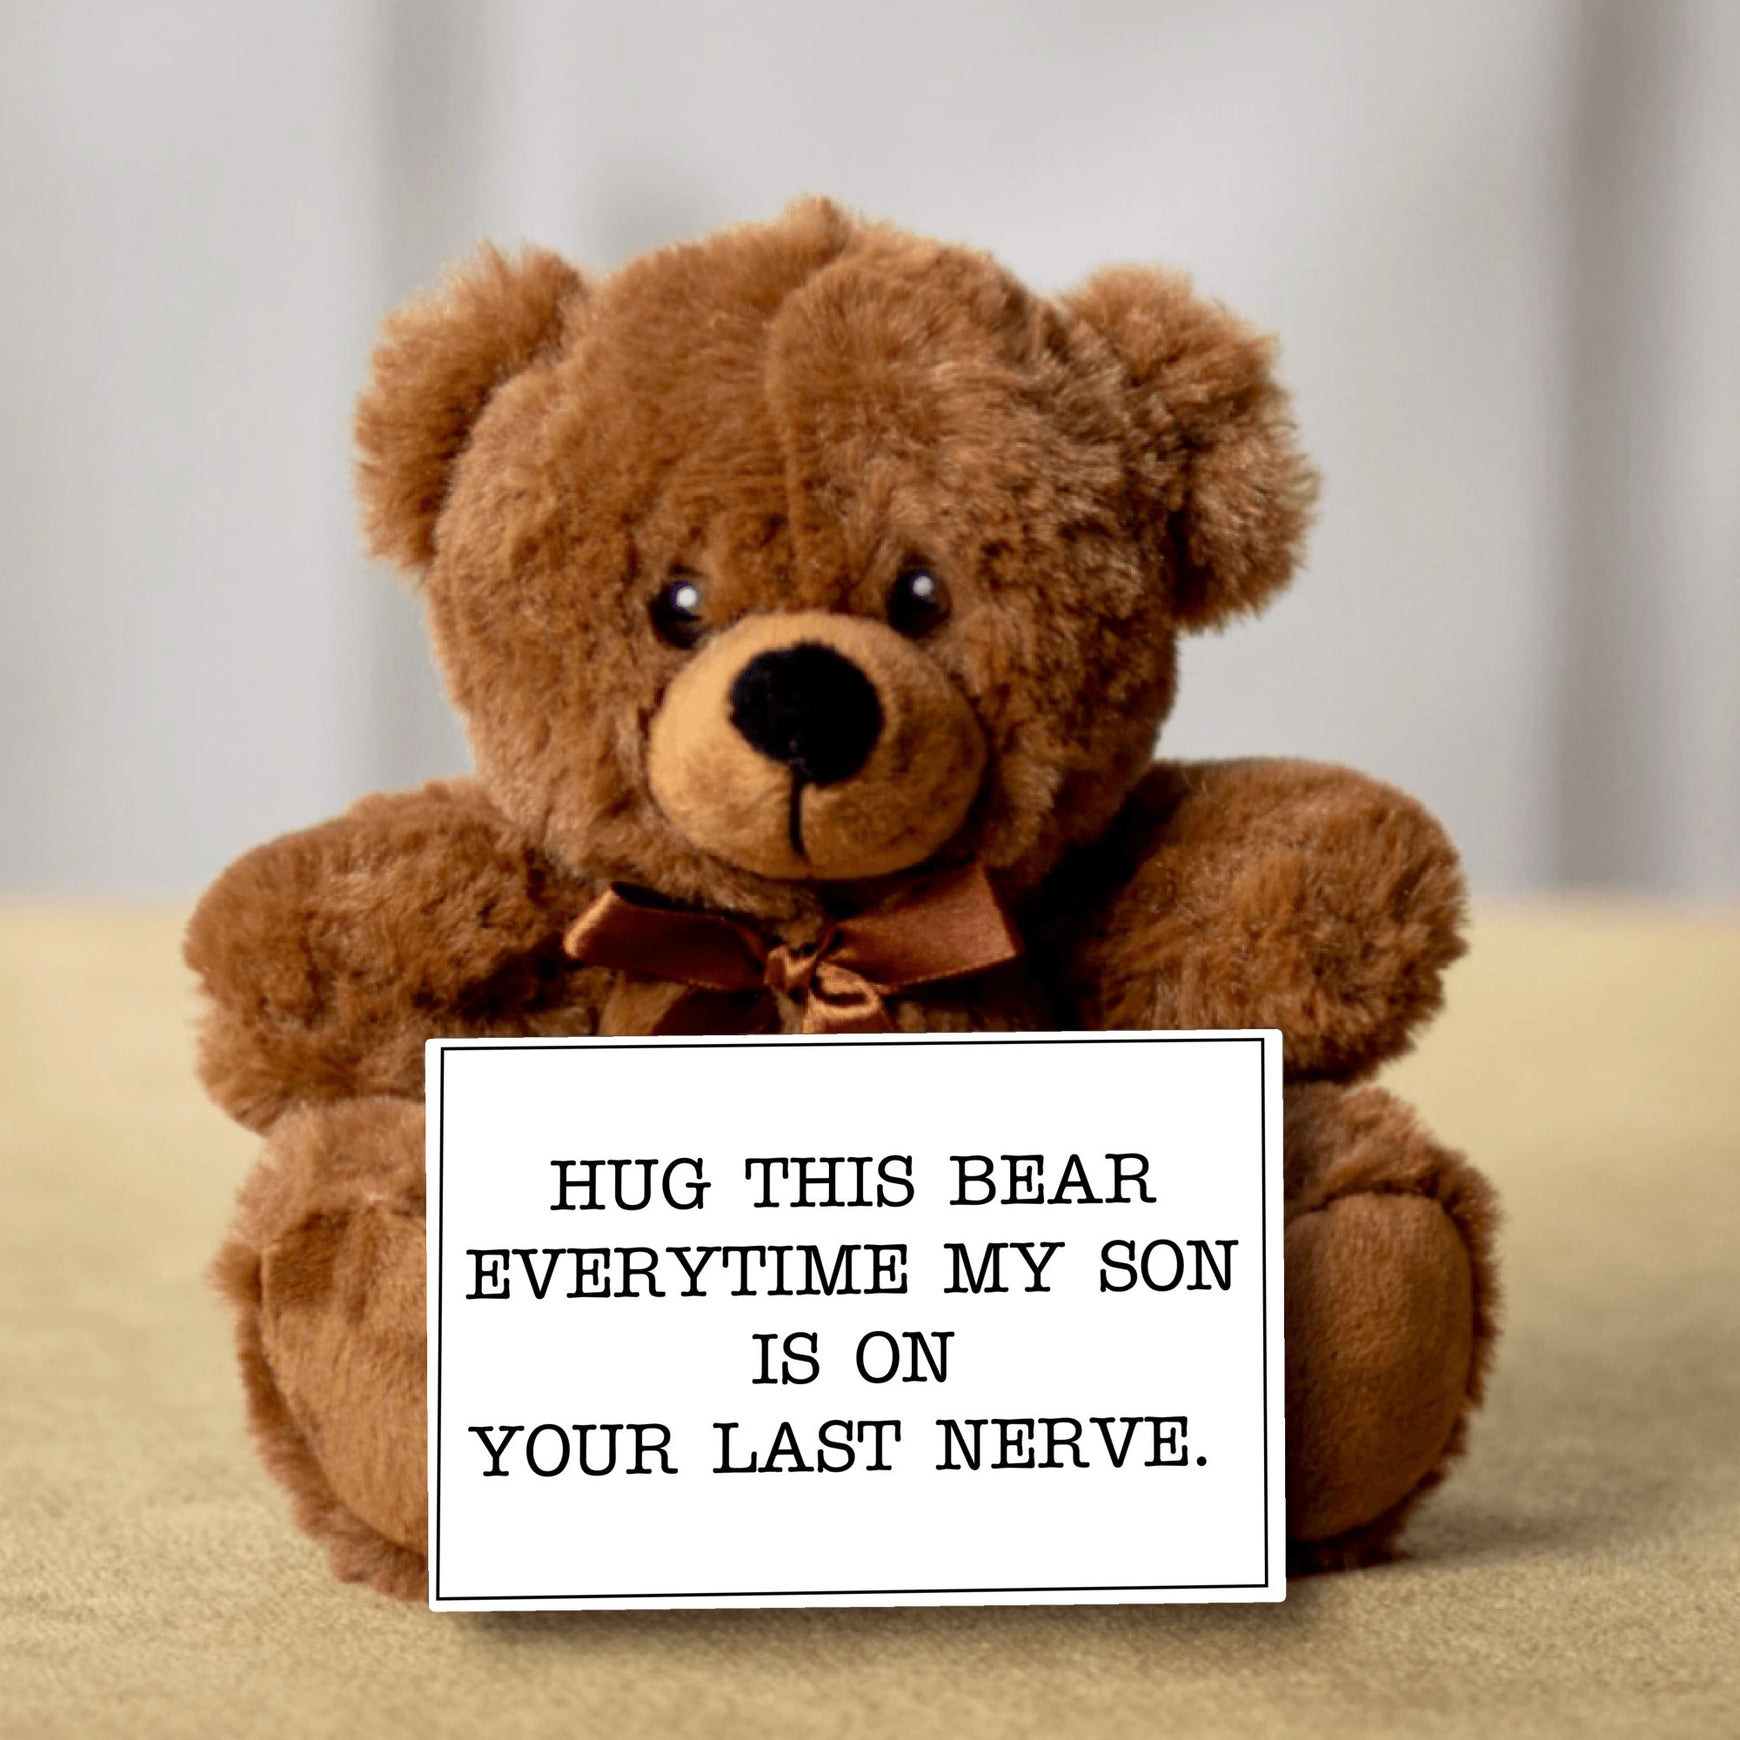 Hug This Bear Daughter In Law Teddy Bear With Postcard - PRICE INCLUDES FREE SHIPPING!!